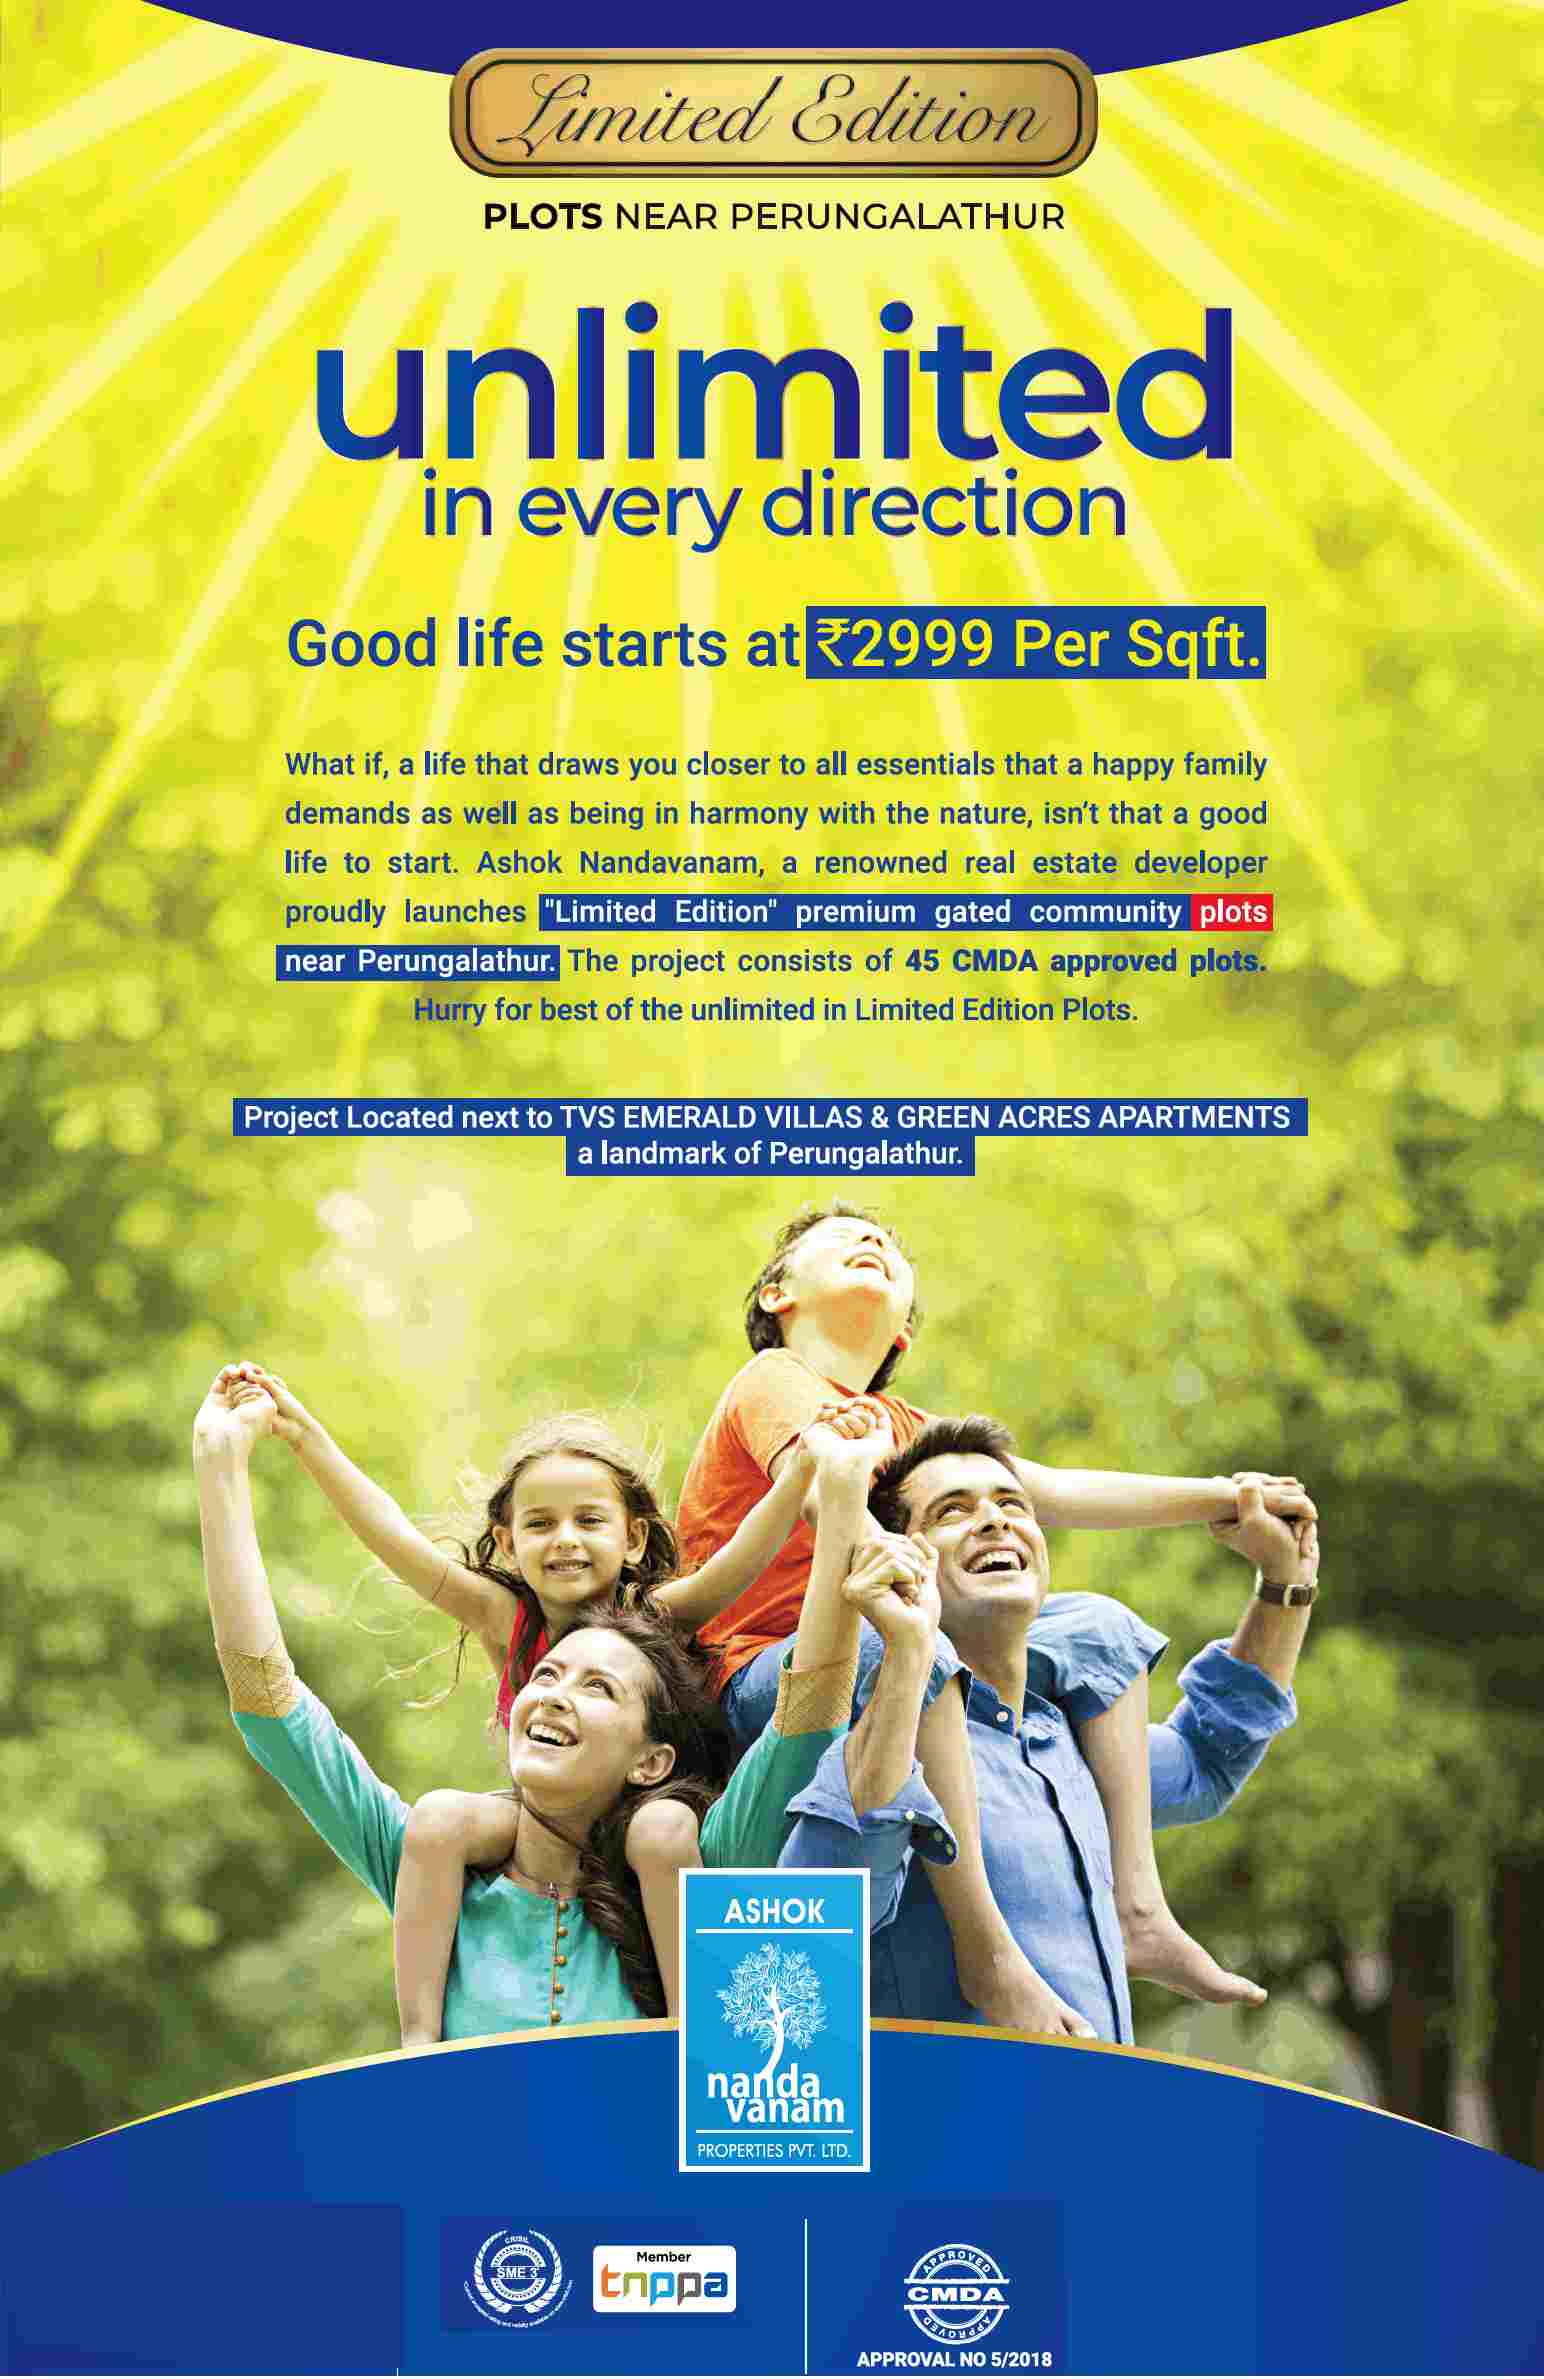 Book plots starting at Rs. 2999 per sq.ft. at Ashok Limited Edition in Chennai Update